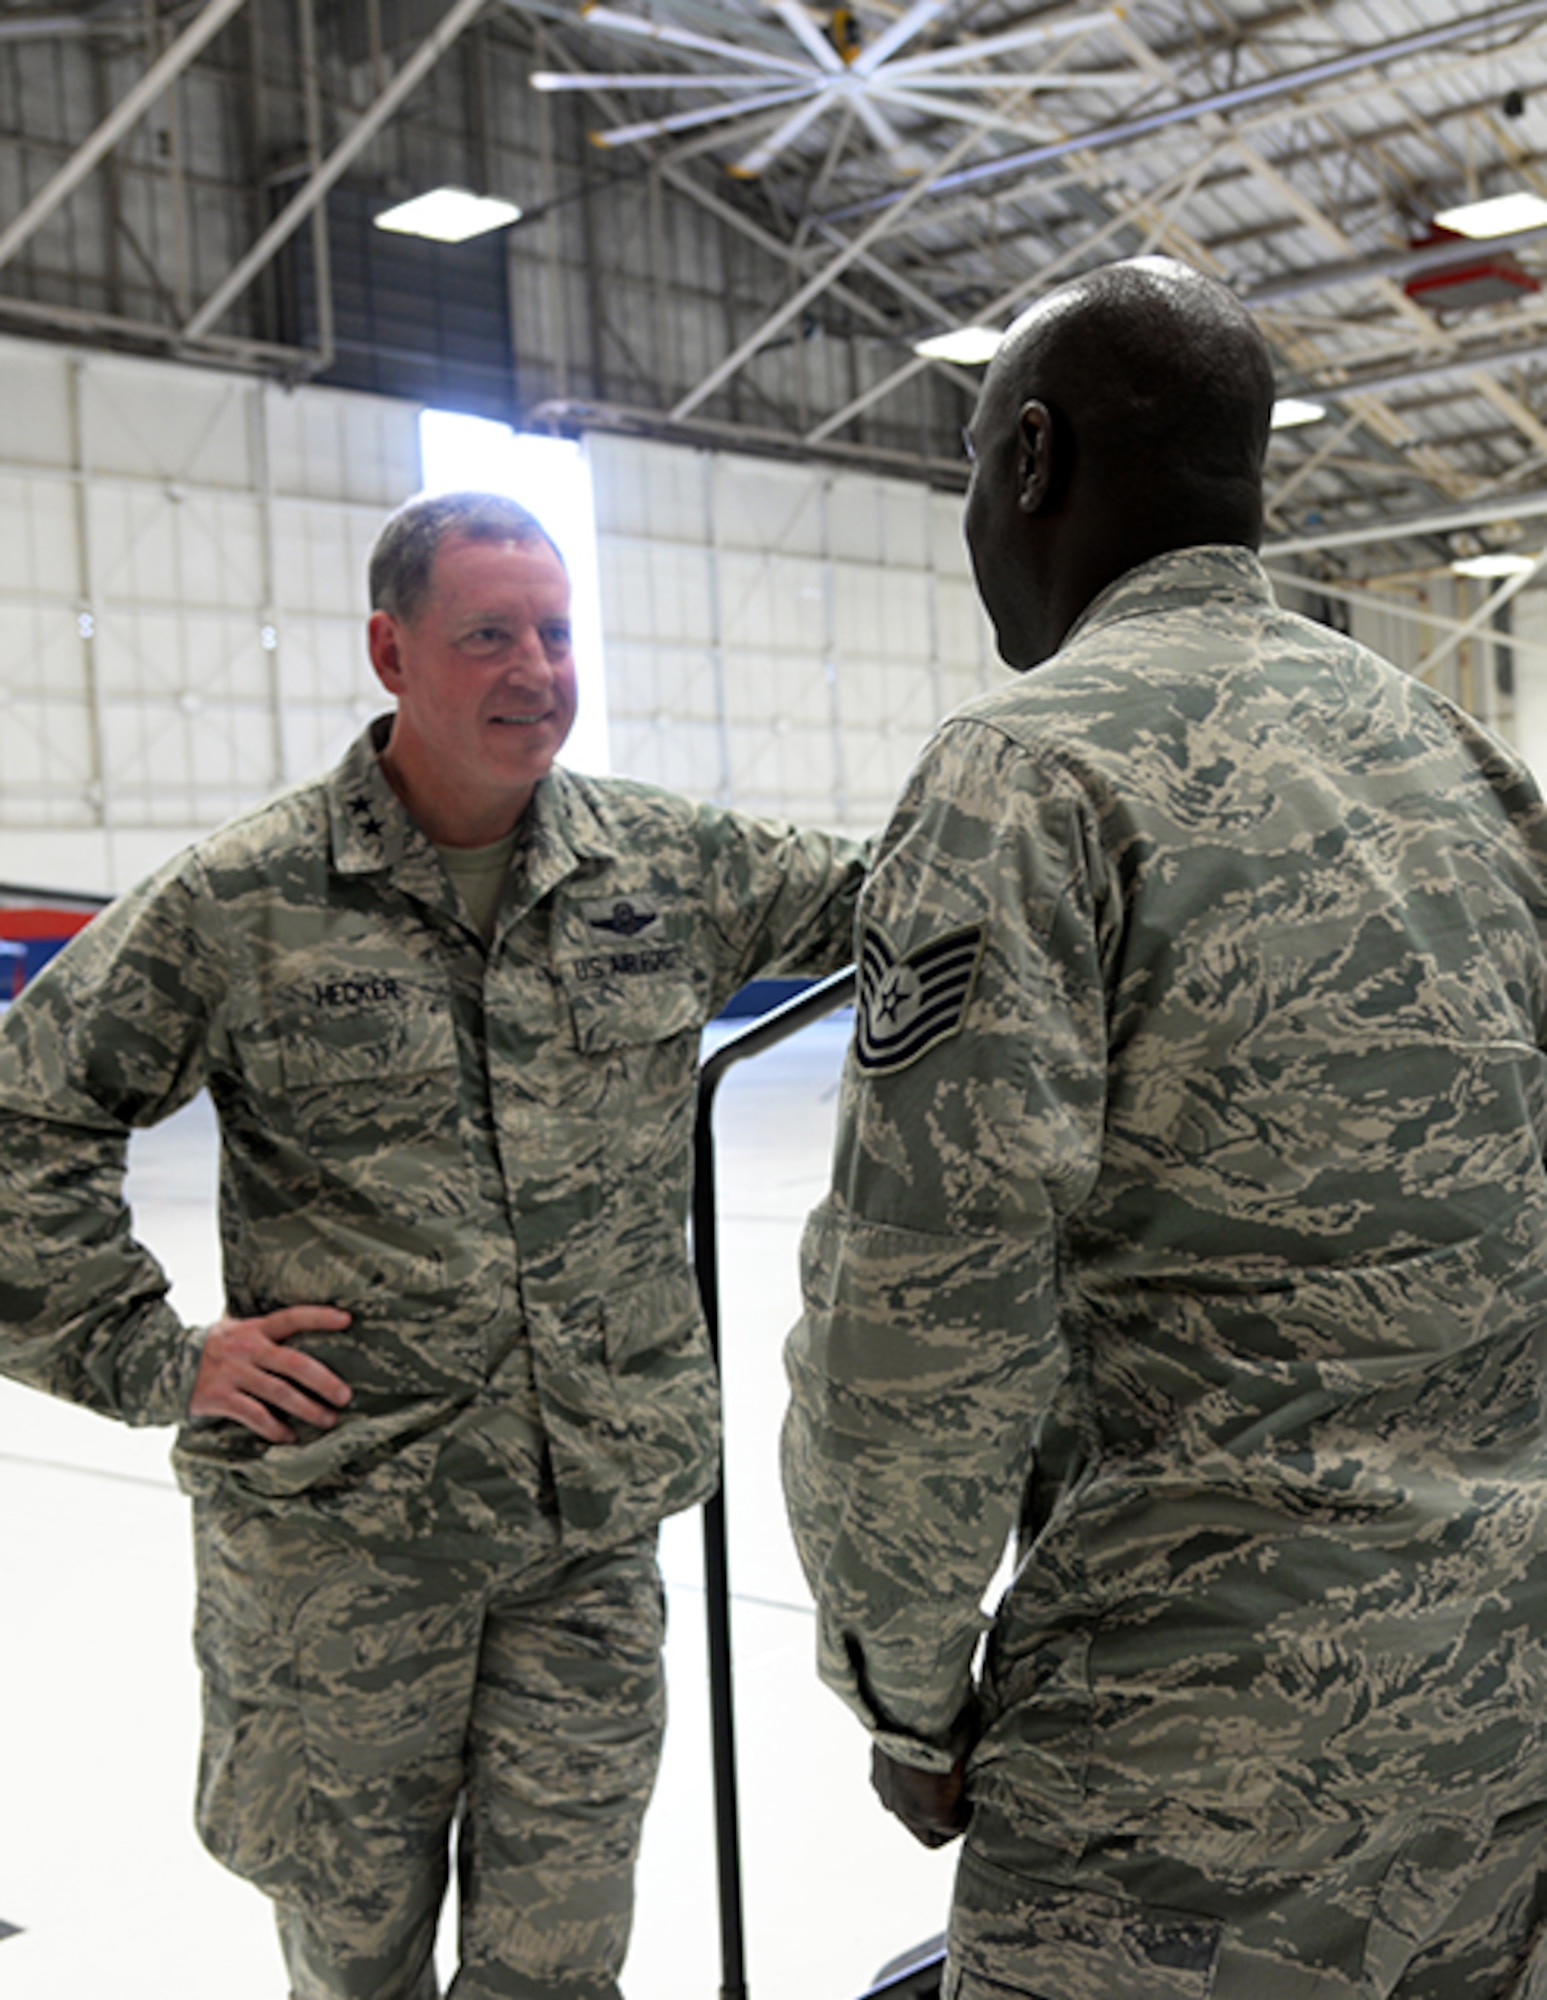 Maj. Gen. James Hecker, 19th Air Force commander, talks to Tech. Sgt. Kevin Fairman, a member of the 149th Fighter Wing, after an all call held Dec. 10 in a maintenance hangar at Joint Base San Antonio-Lackland, Texas. 